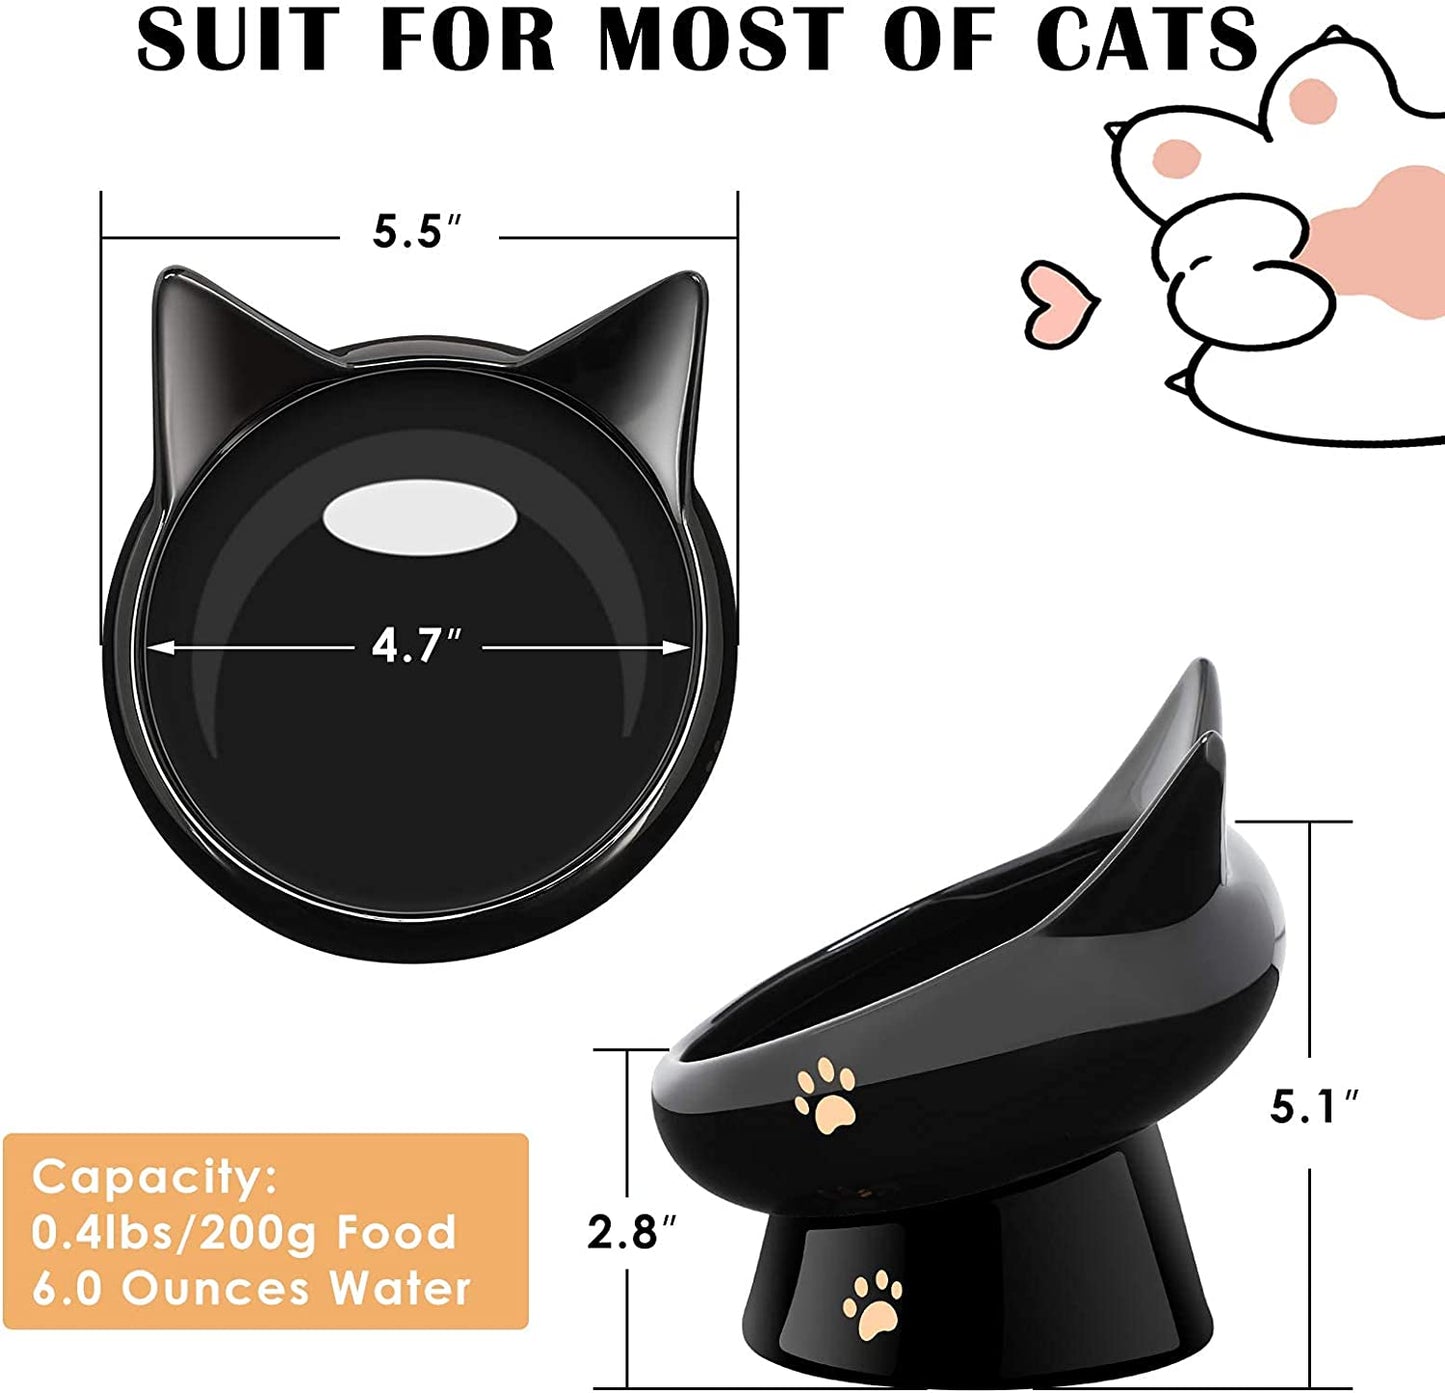 Cat Bowl, Raised Cat Food Bowls anti Vomiting, Handmade Elevated Cat Bowl, Ceramic Pet Food Bowl for Flat-Faced Cats, Small Dogs, Protect Pet'S Spine,Dishwasher Safe, Black and White, 2Pcs (Bowl-2)